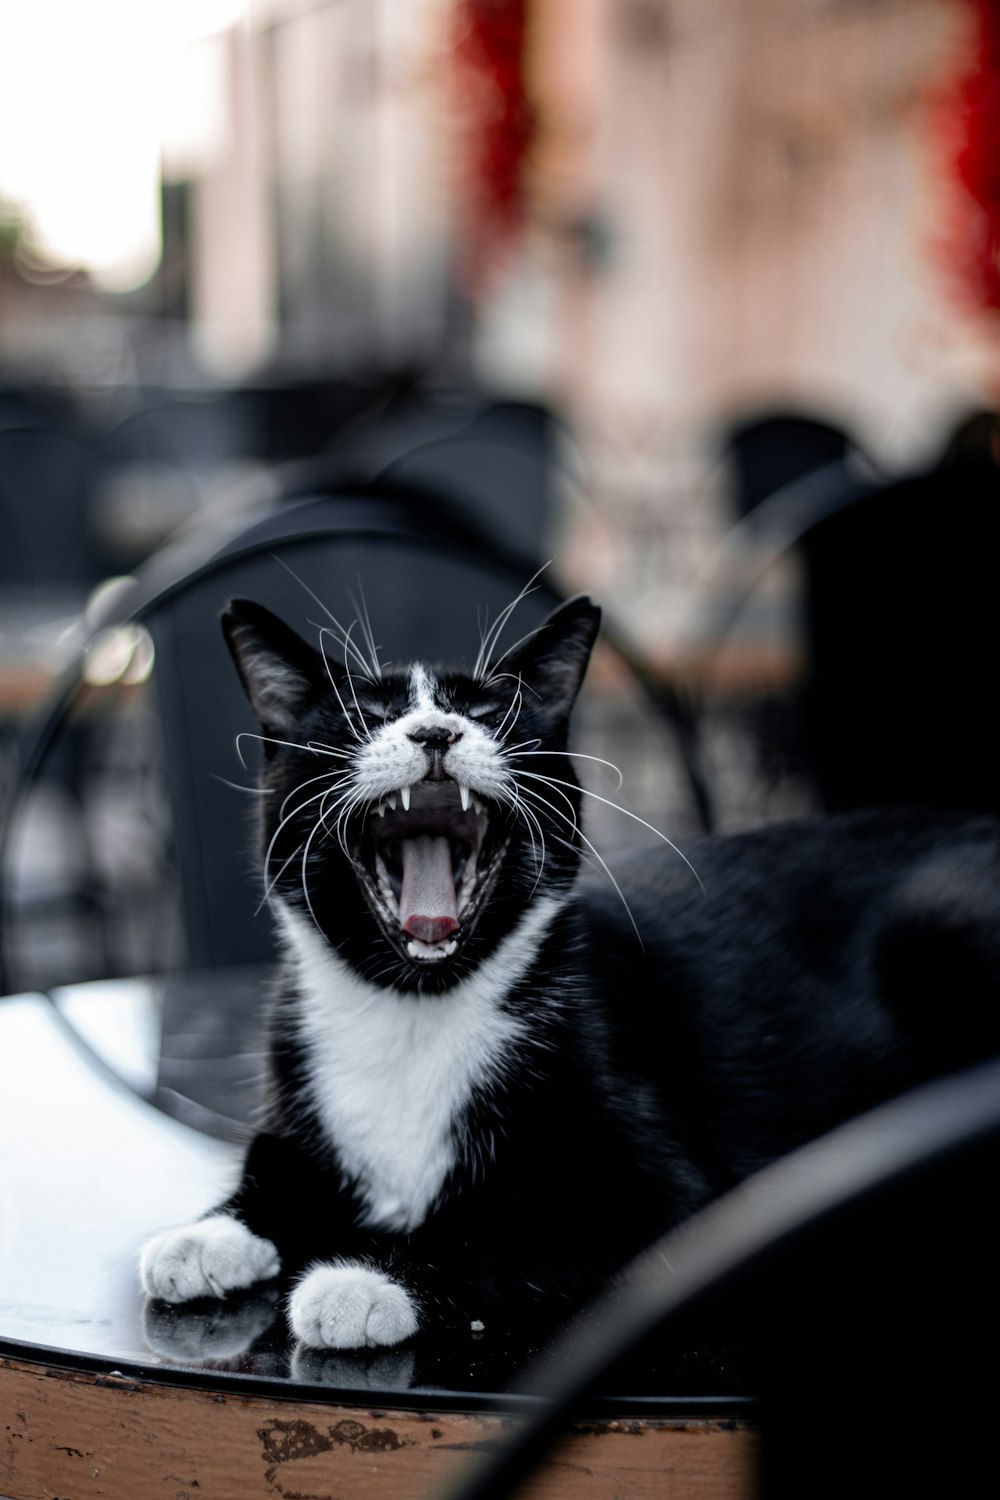 a black and white cat yawns while sitting on a table